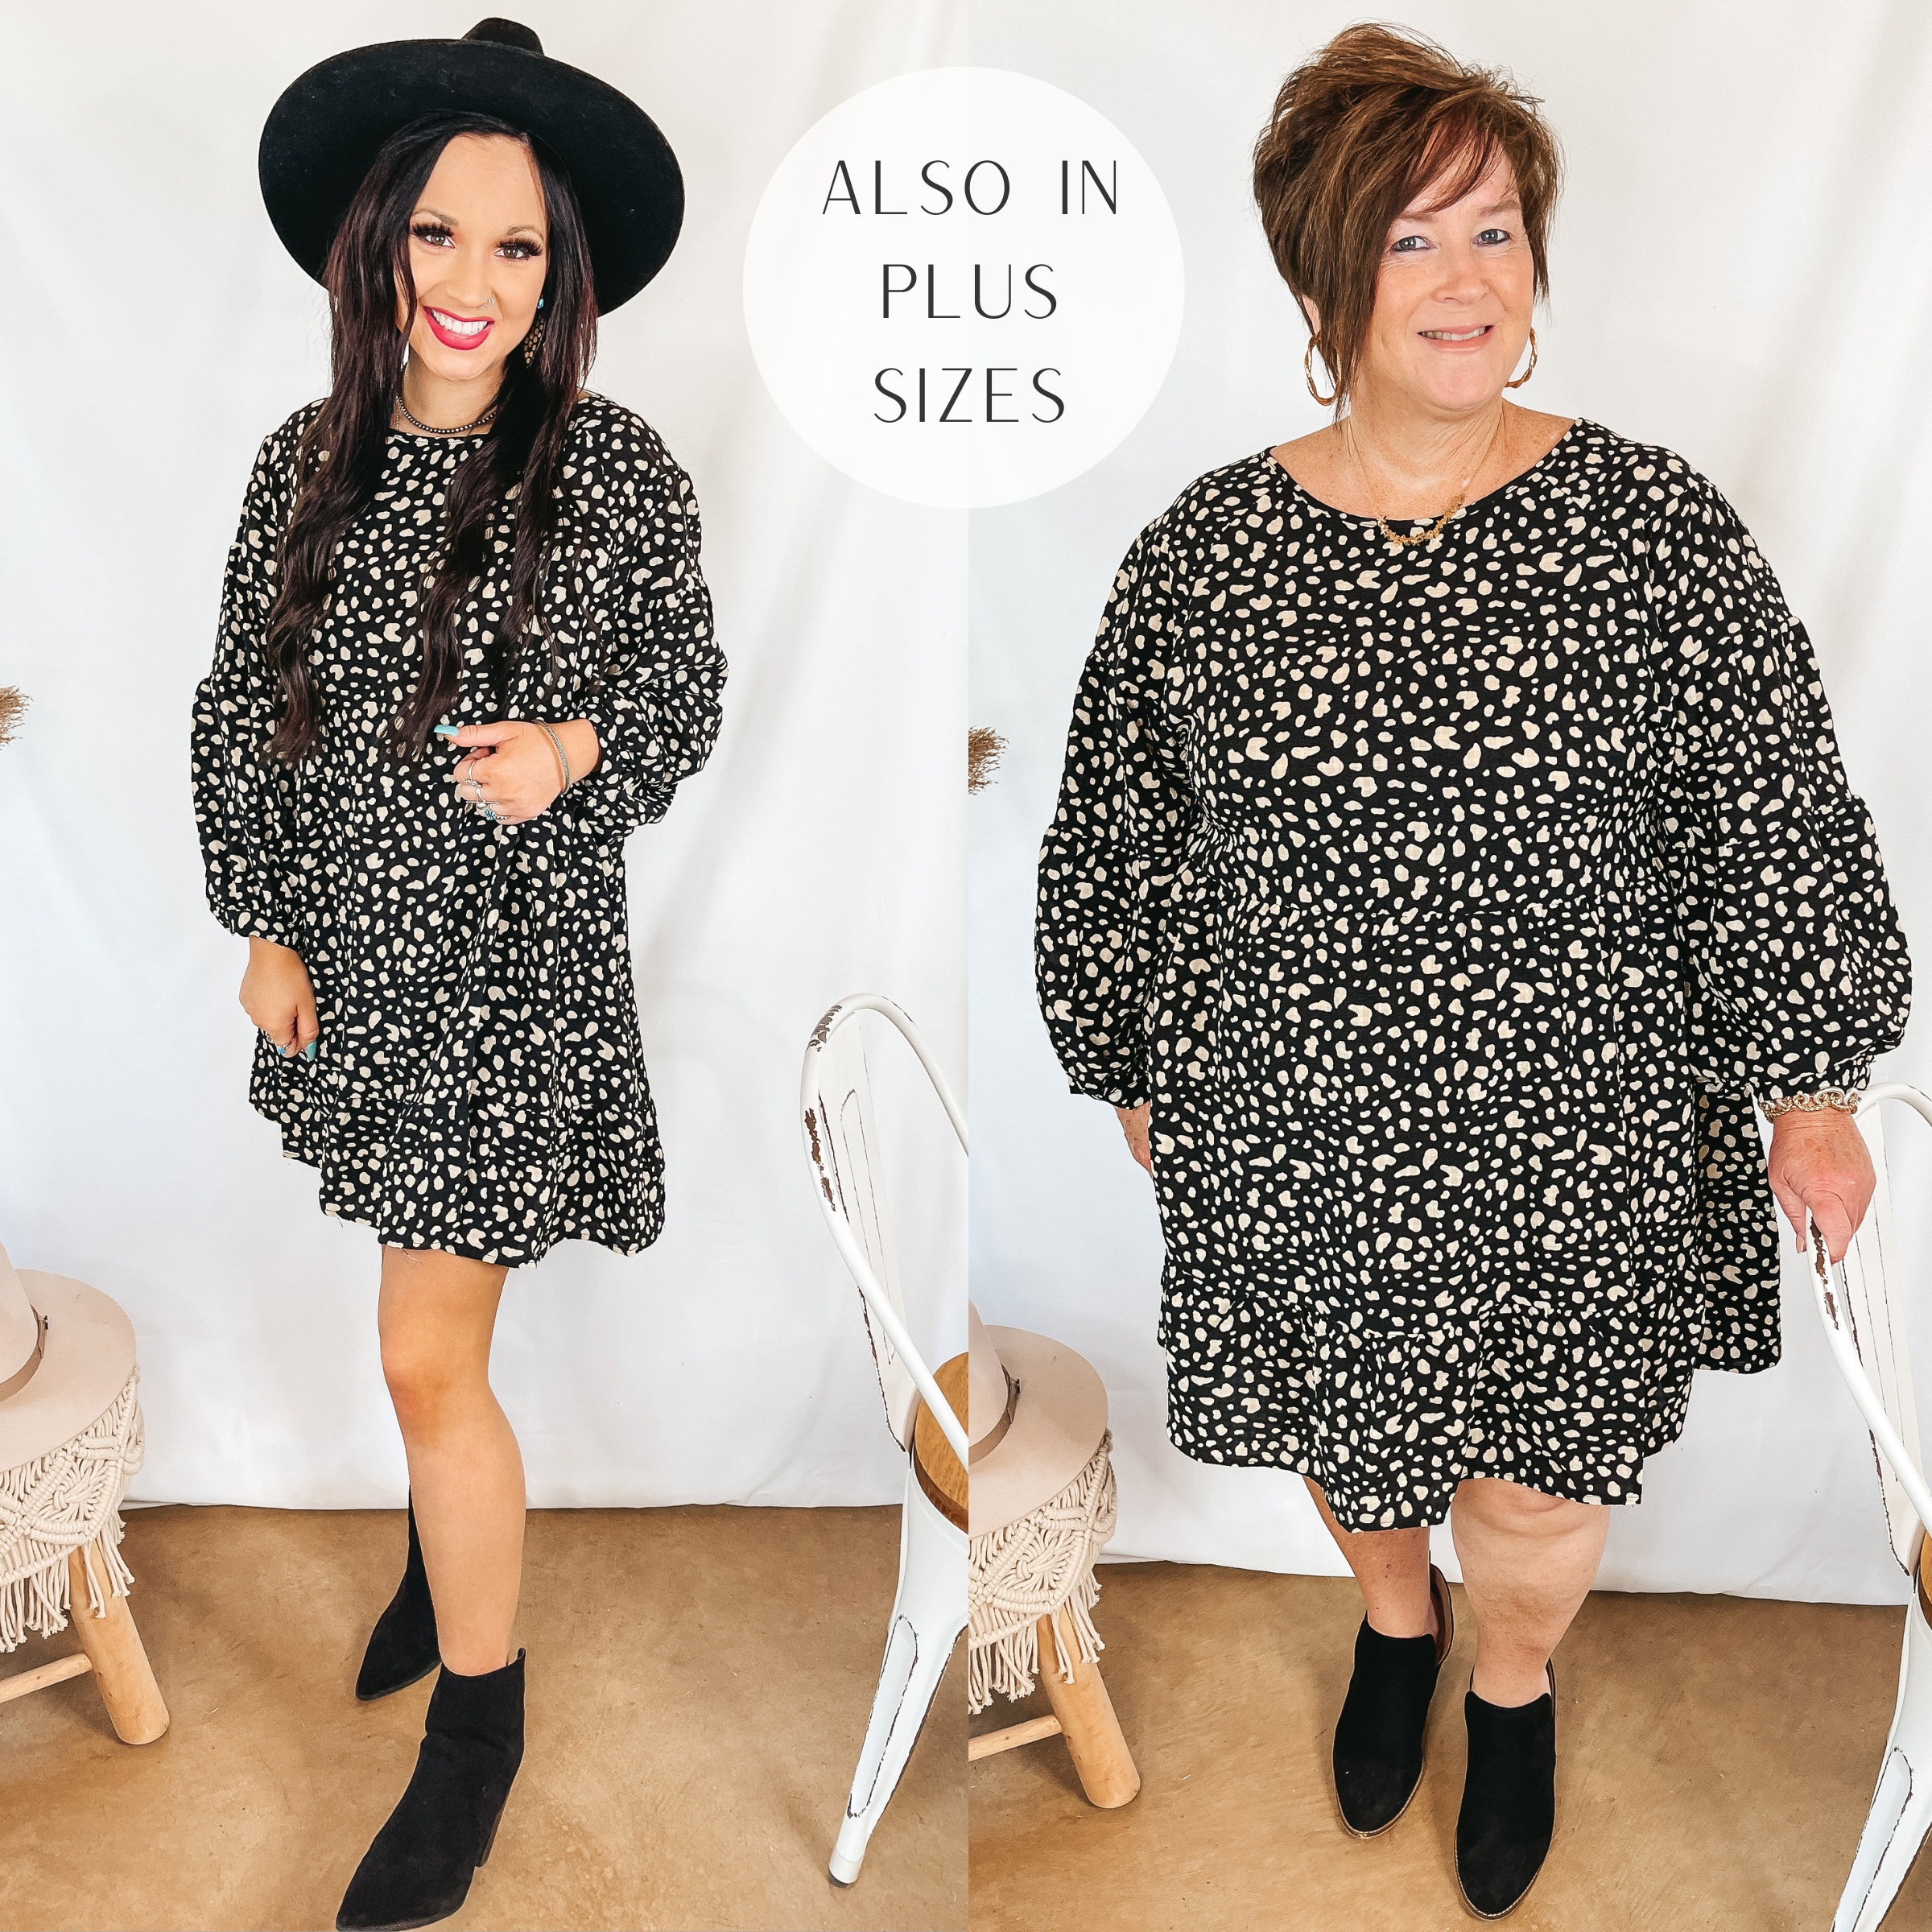 Models are wearing a black long sleeve dress that has a white spotted print. Size small model is wearing black booties and a black hat. Plus size model is wearing black booties and gold jewelry.